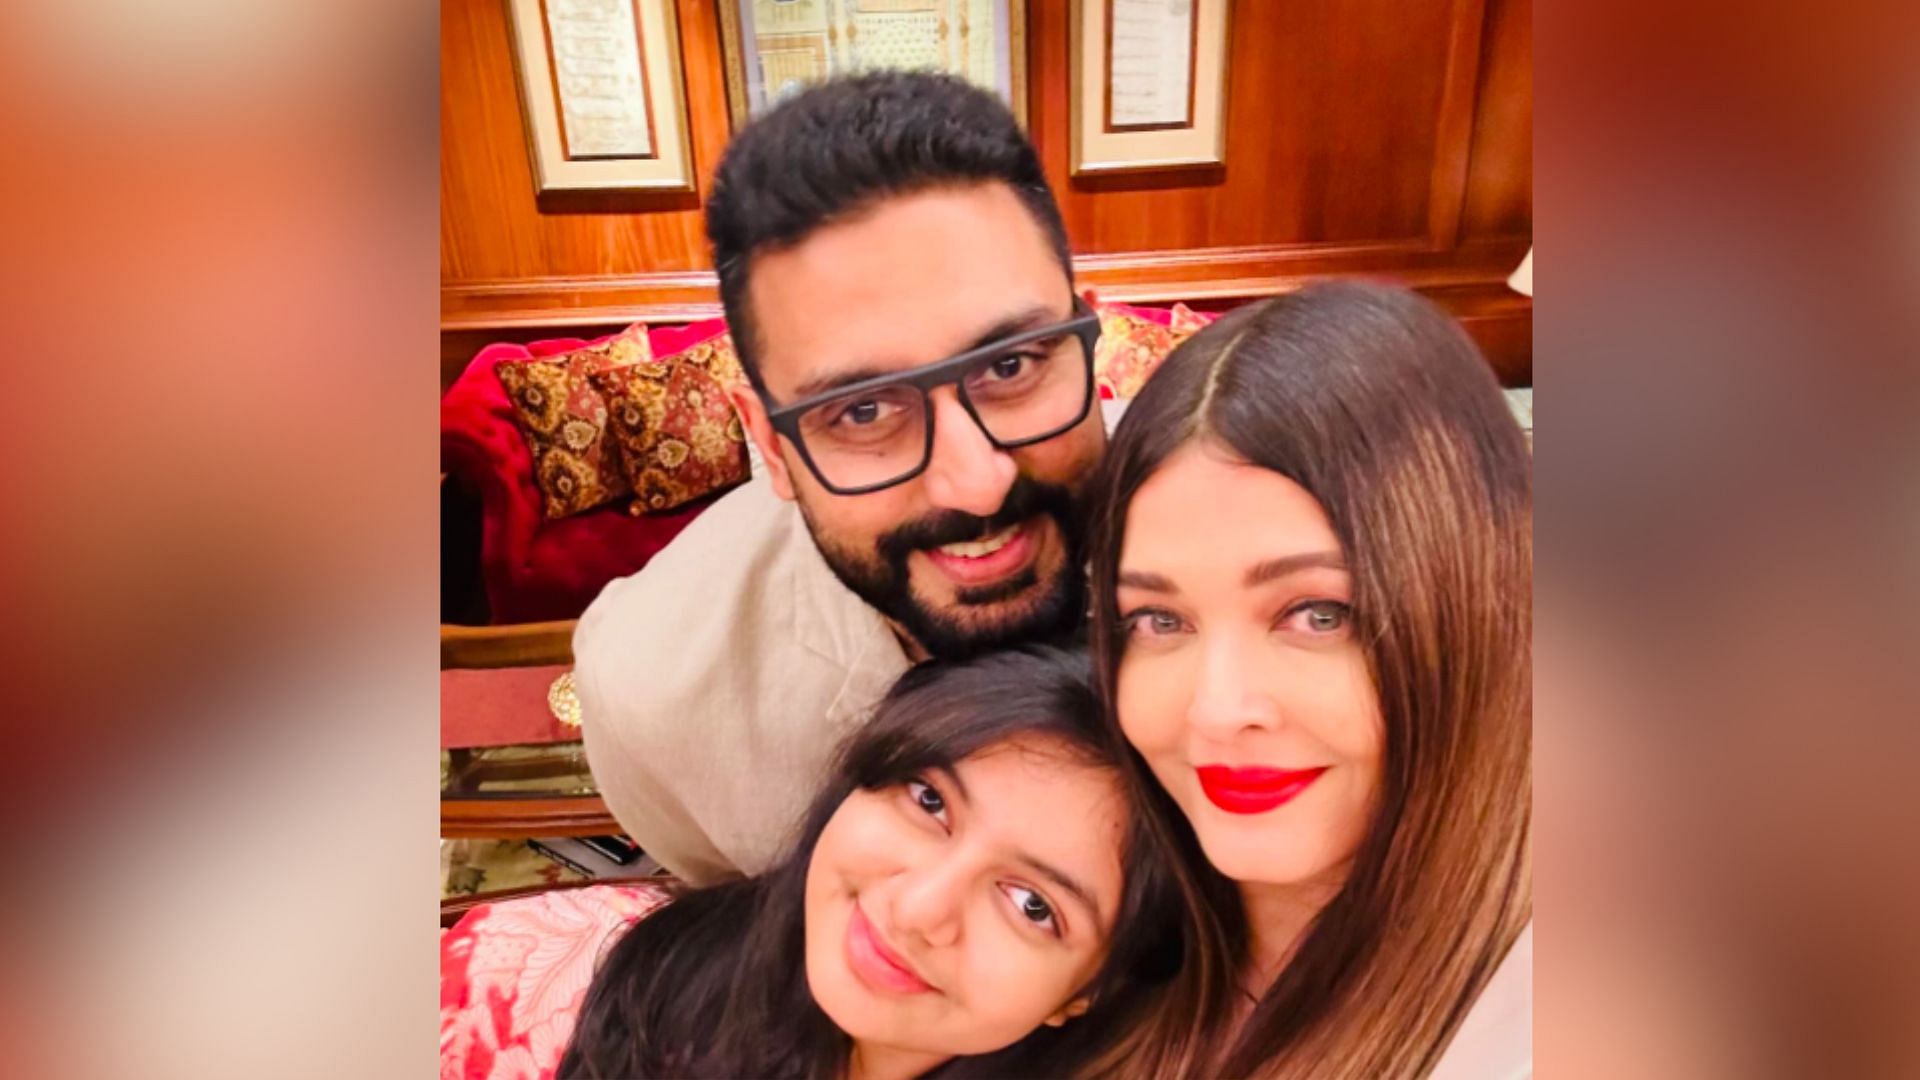 <div class="paragraphs"><p>Bollywood actors Aishwarya Rai and Abhishek Bachchan marked their 17th wedding anniversary on 20 April by sharing a heartwarming post on Instagram, which included their daughter Aaradhya.</p></div>